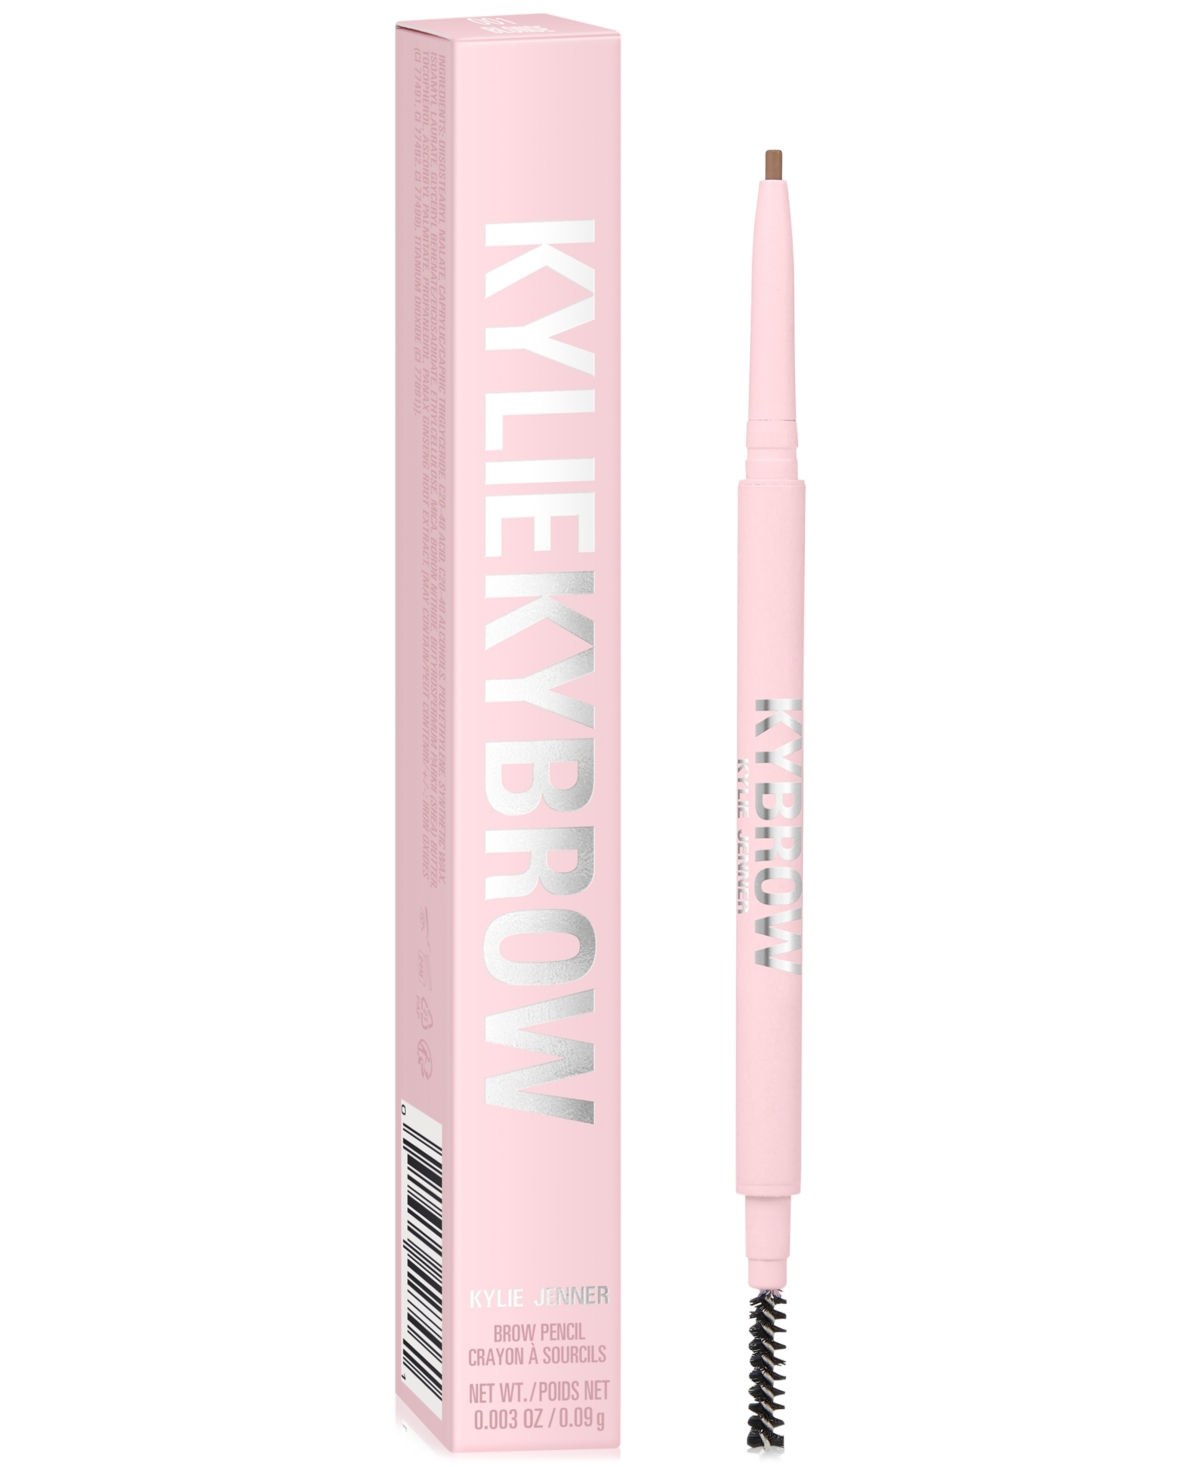 Kylie Cosmetics Kybrow Brow Pencil In Blonde